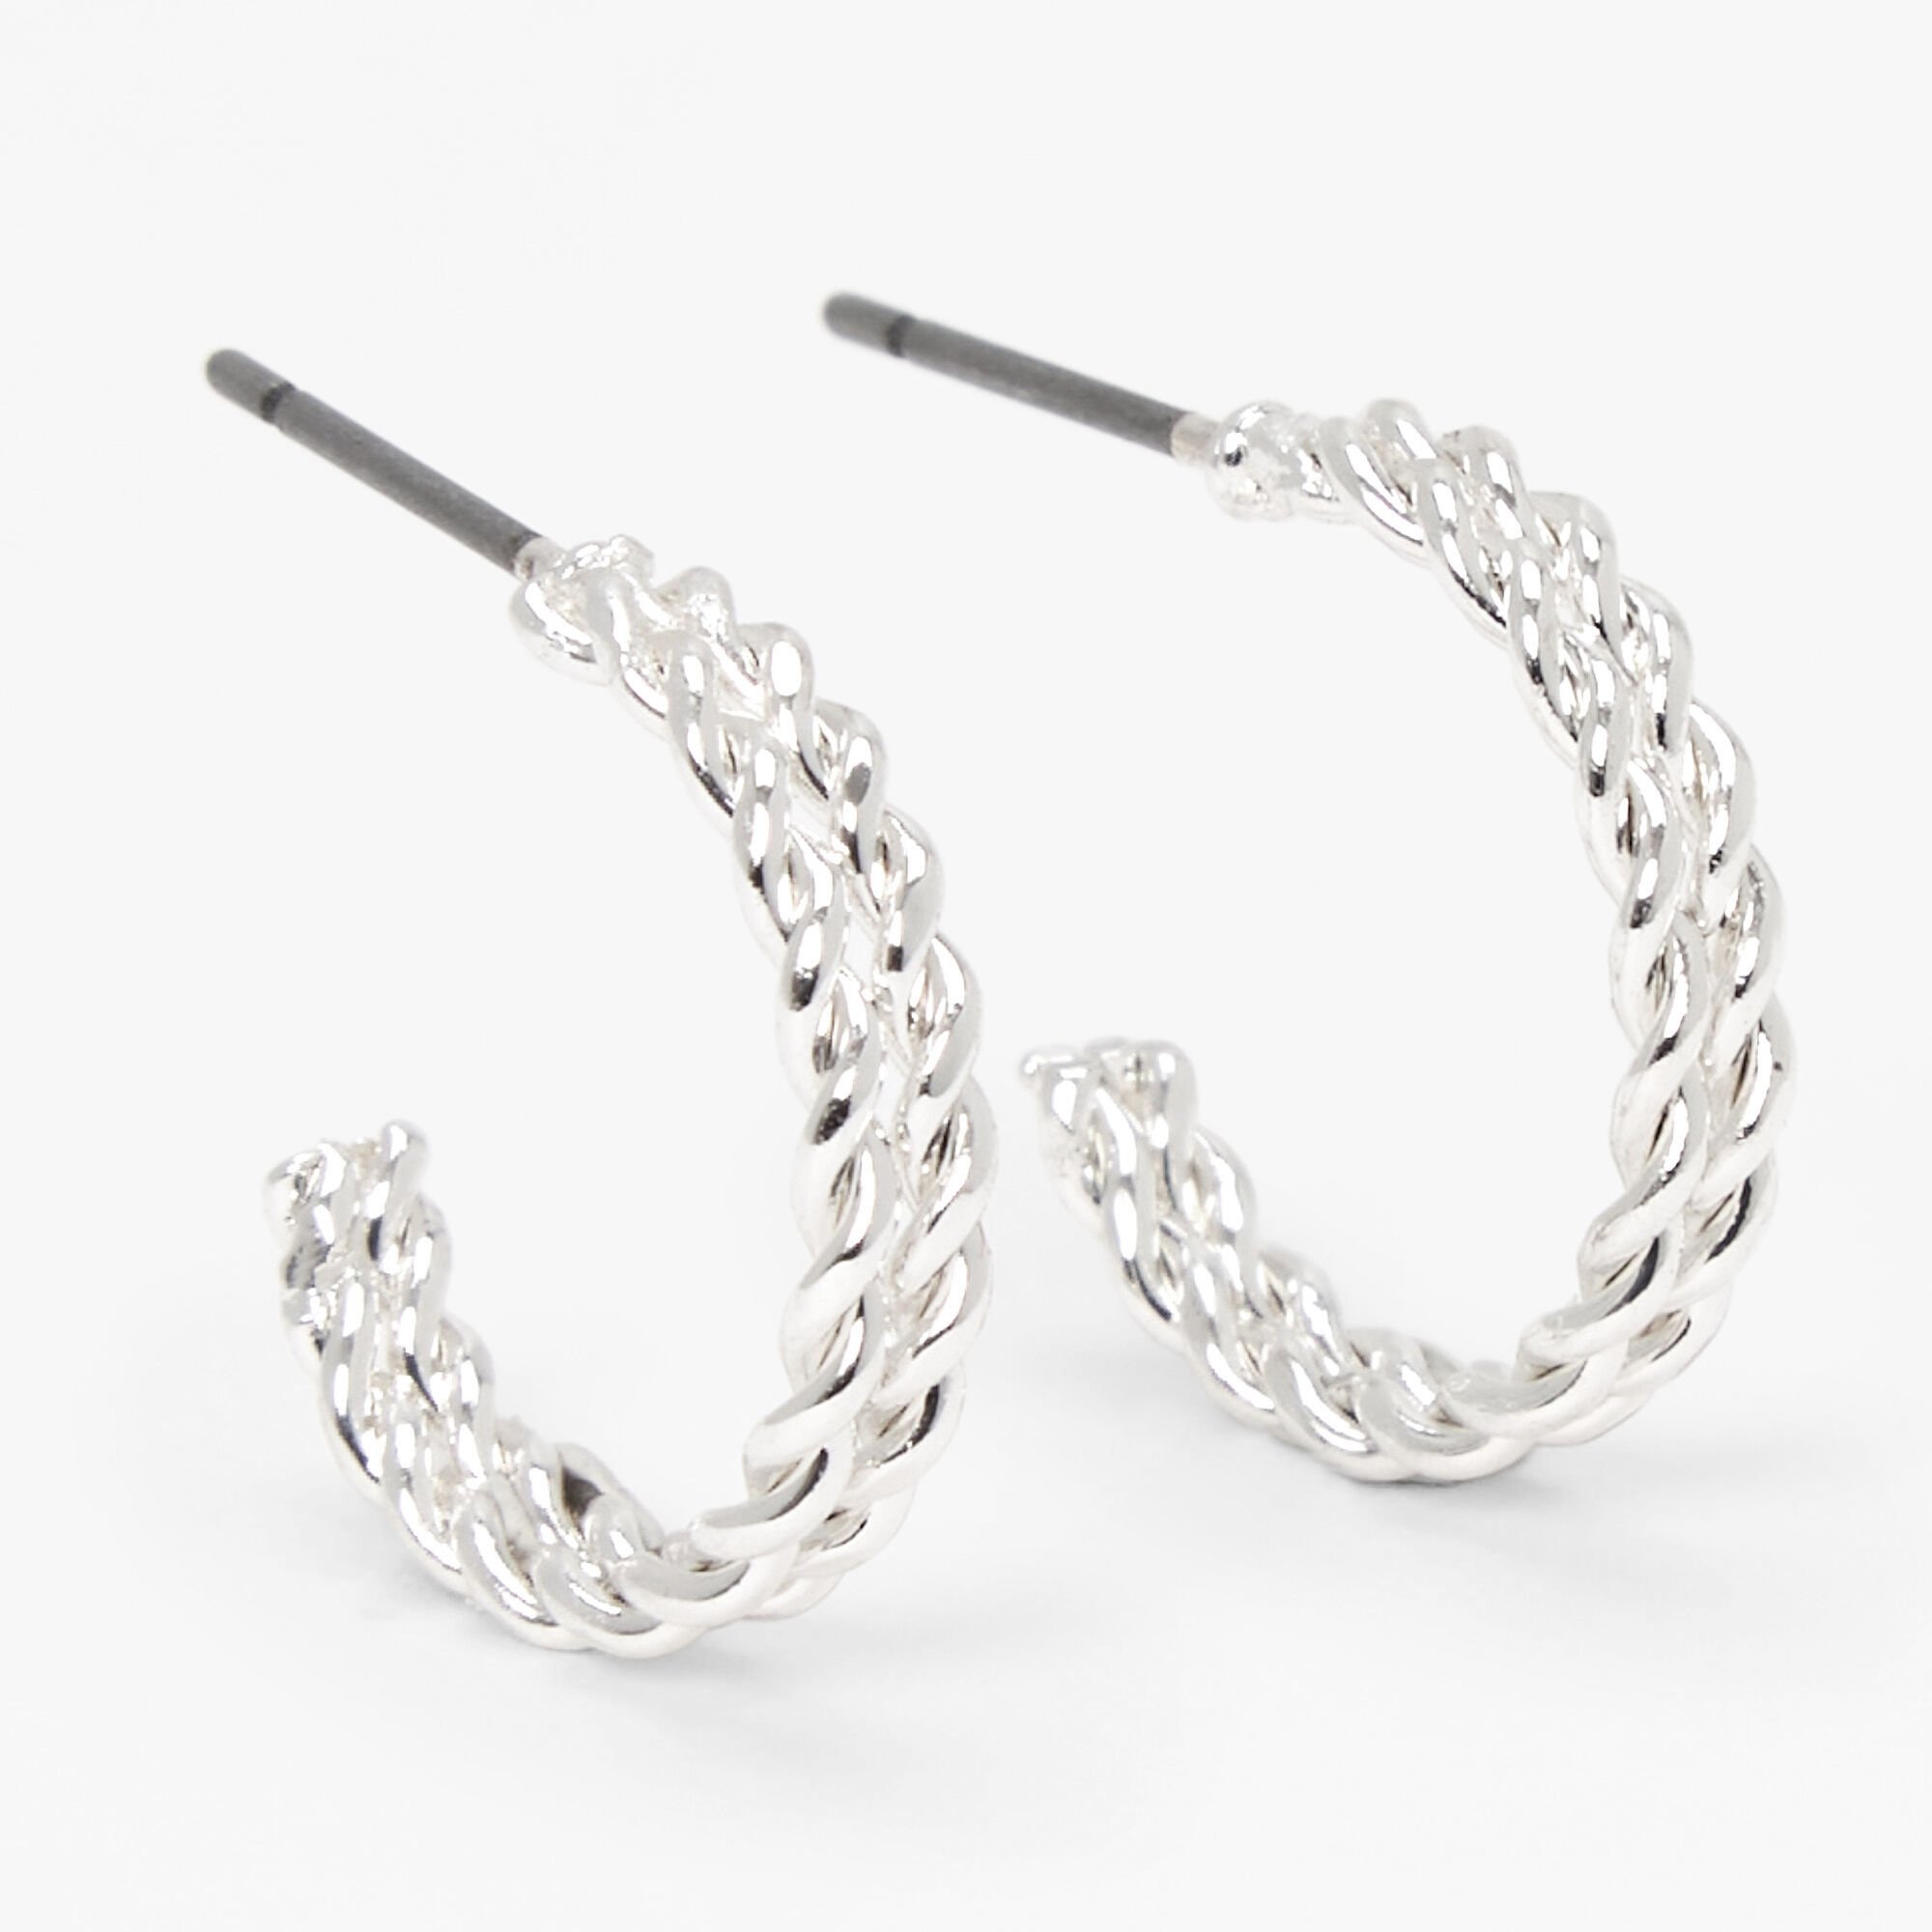 View Claires Tone 15MM Mini Braided Hoop Earrings Silver information